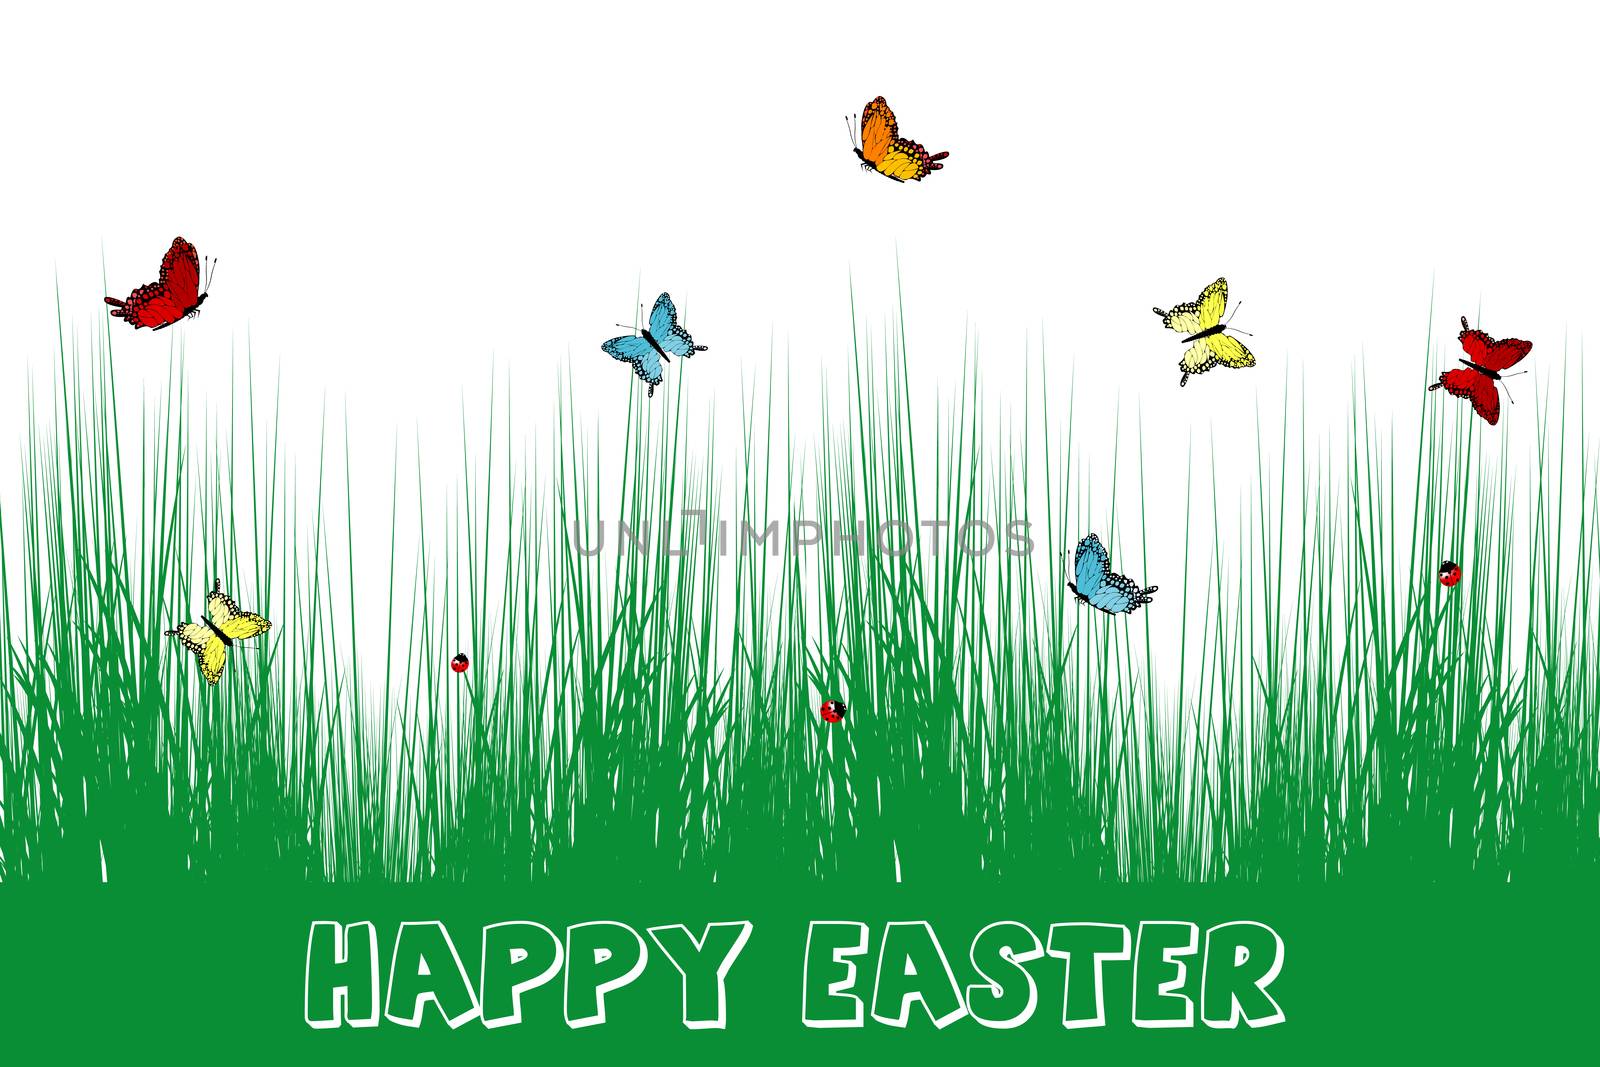 Happy Easter card with grass and butterflies